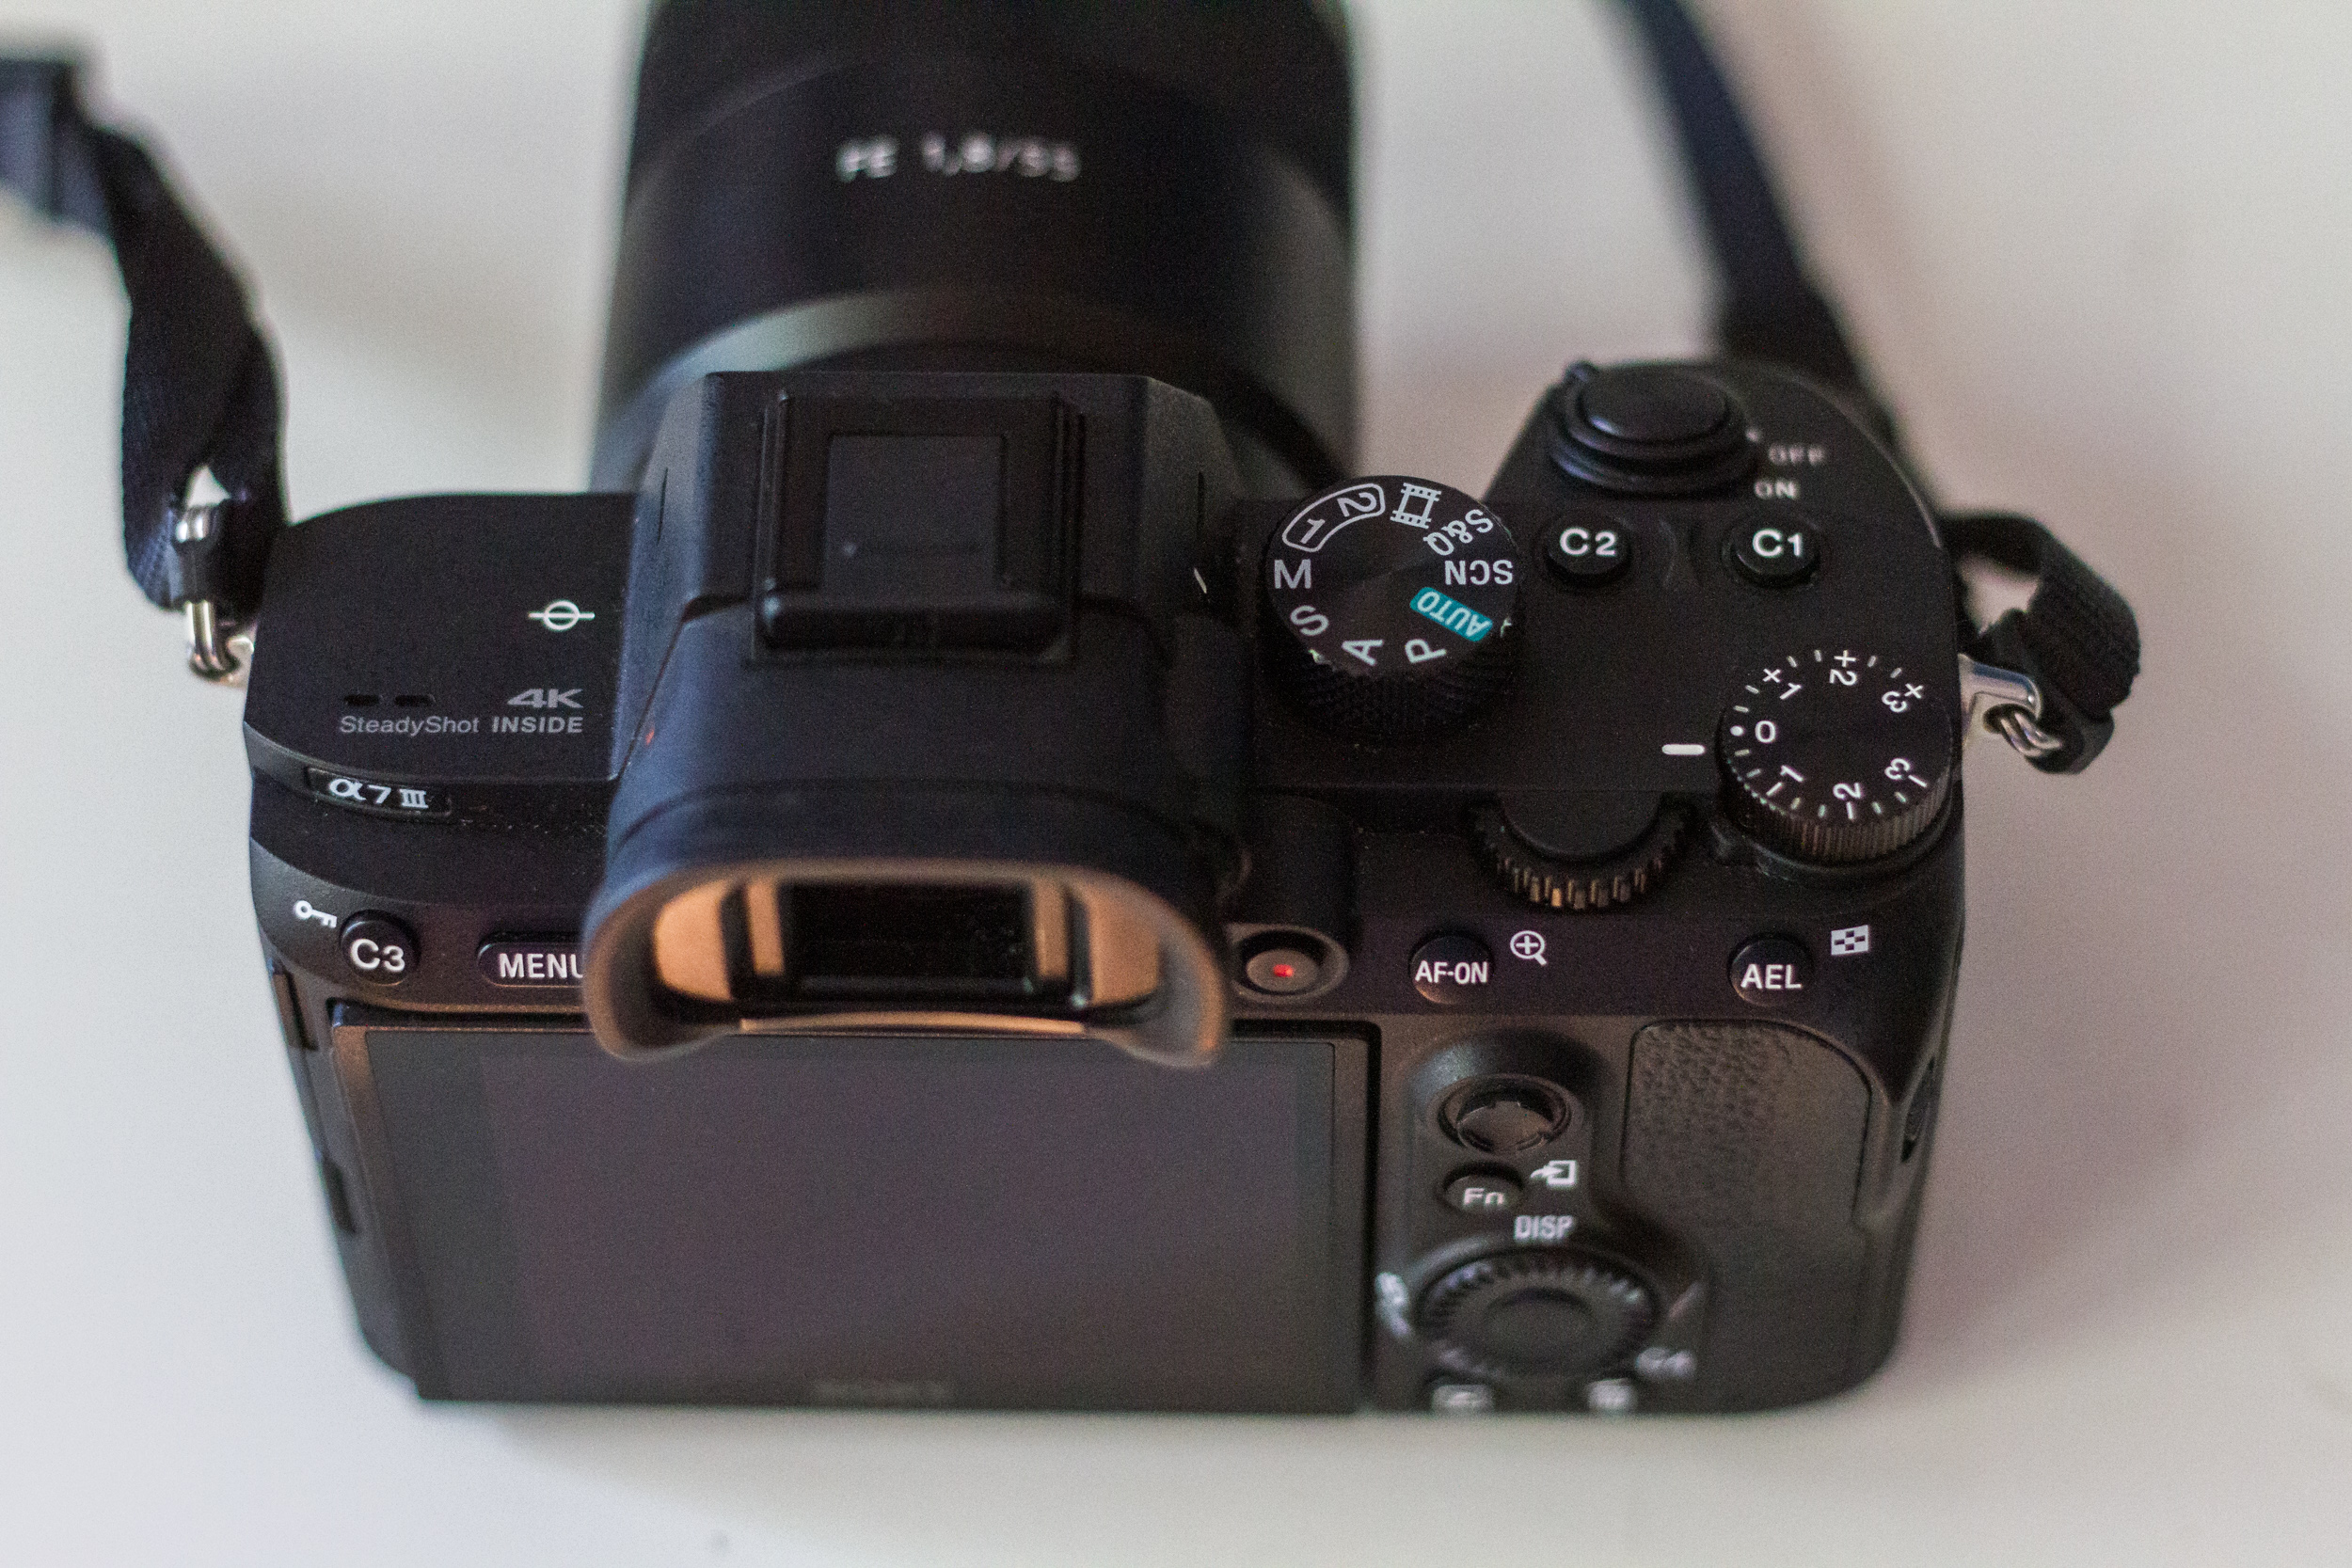 Silent Shooting with the Sony a7III Mirrorless Camera